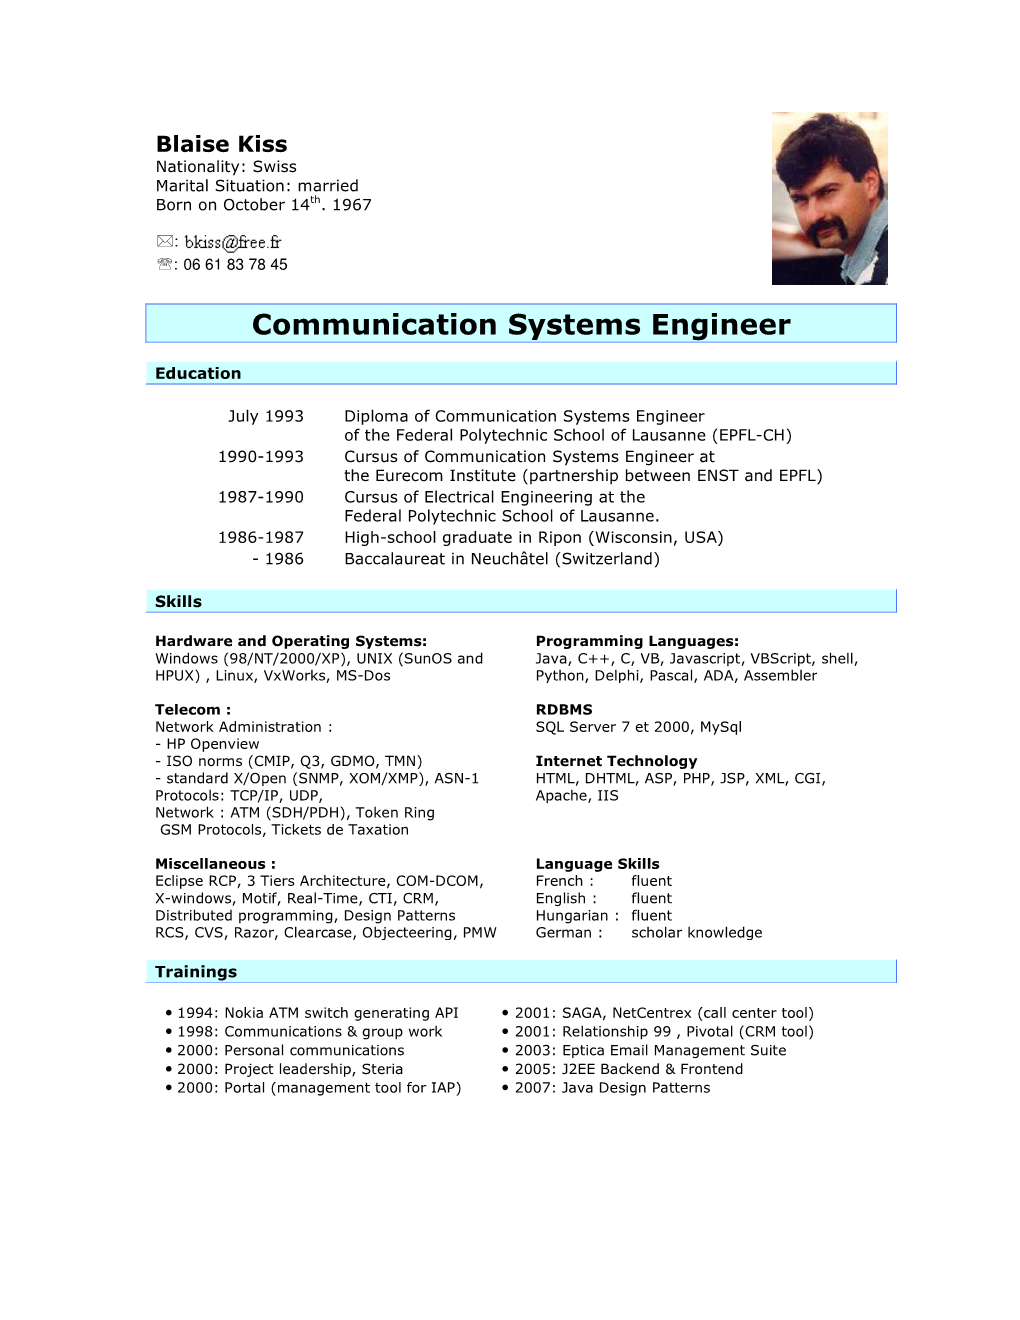 Communication Systems Engineer